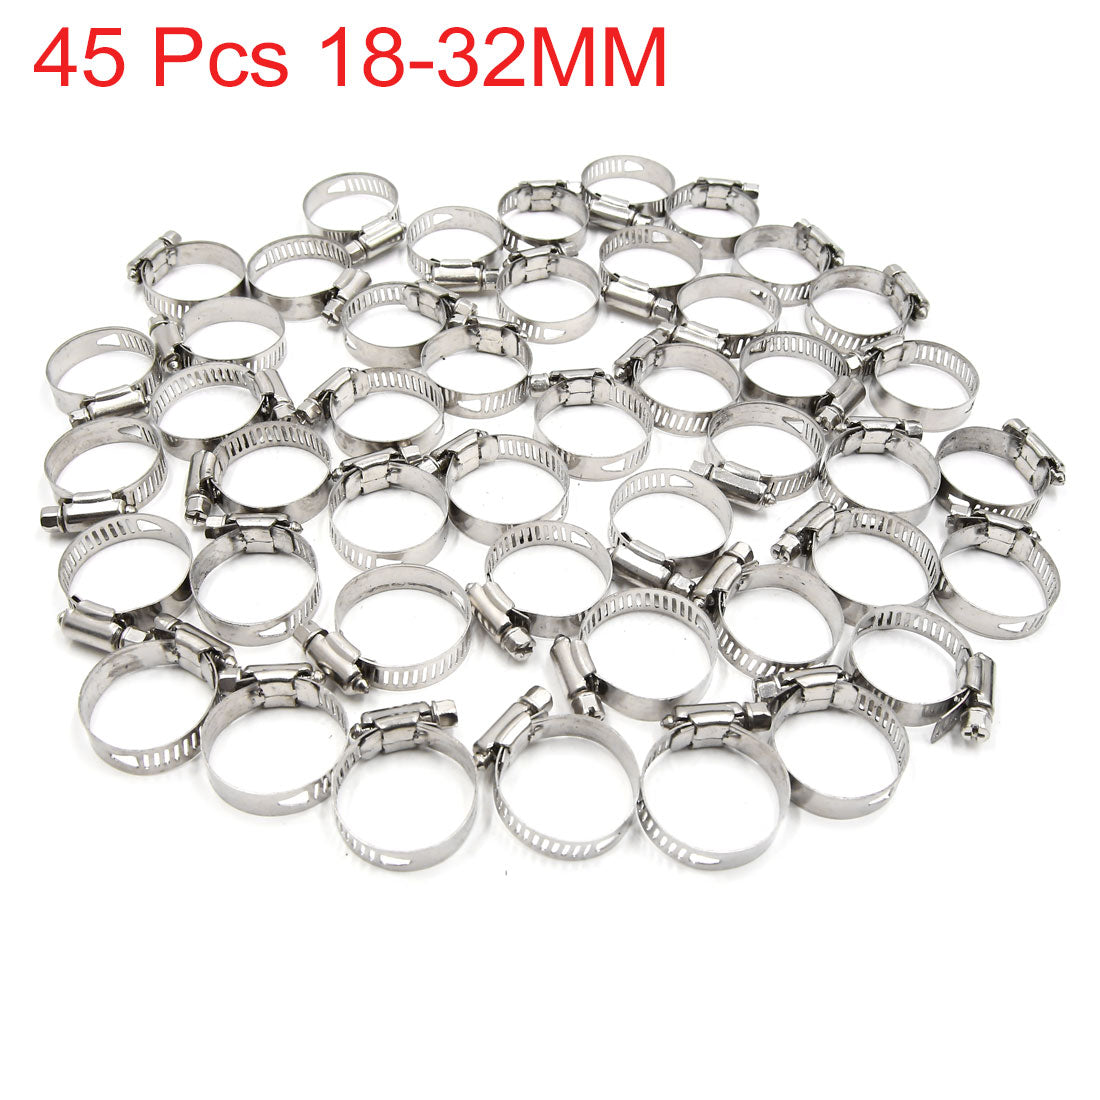 uxcell Uxcell 45pcs 18-32MM Stainless Steel Car Vehicle Drive Hose Clamp Fuel Line  Clip